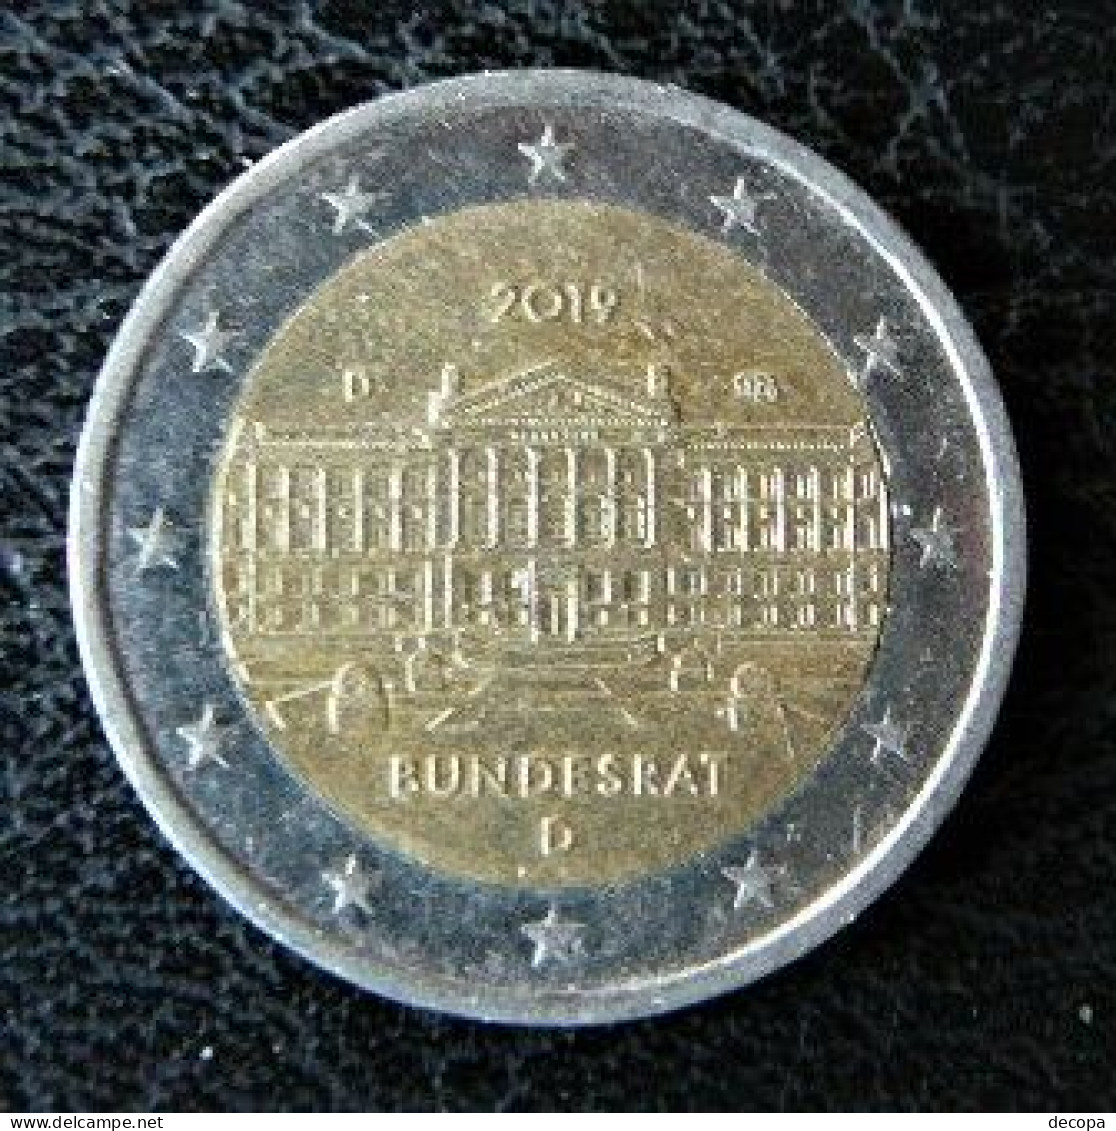 Germany - Allemagne - Duitsland   2 EURO 2019 D     Speciale Uitgave - Commemorative - Germania